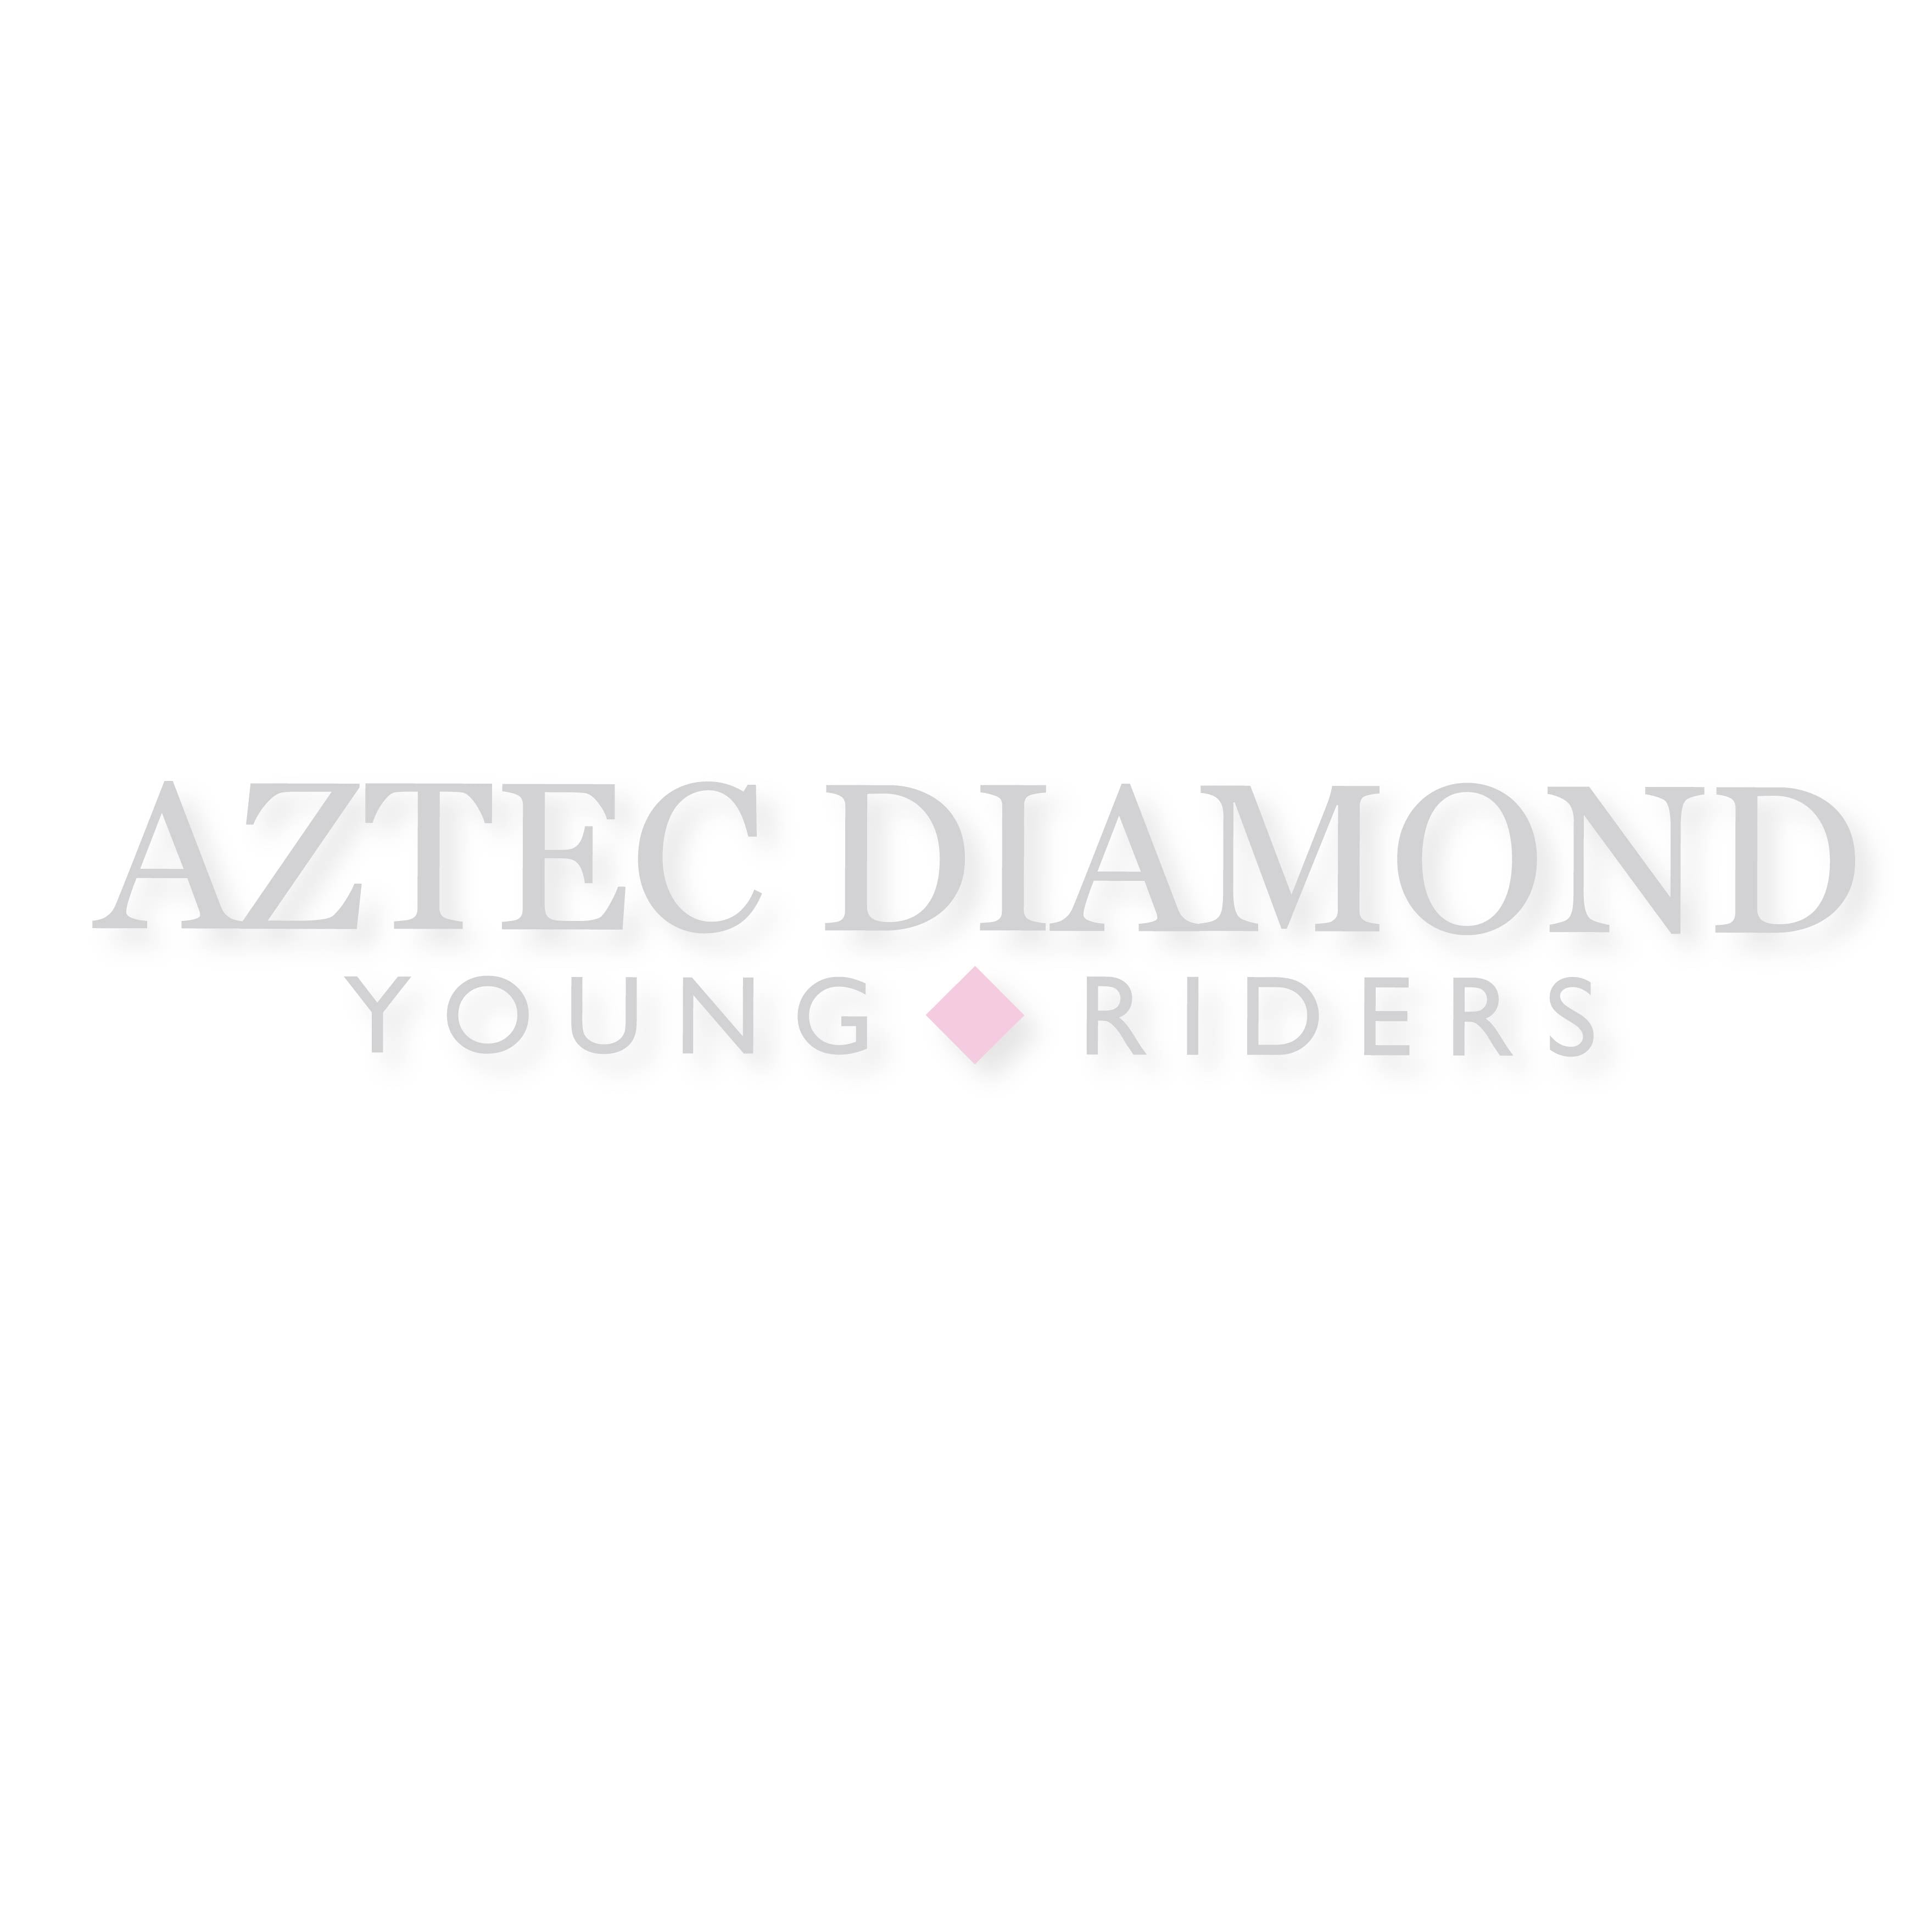 Aztec Diamond Equestrian are launching a Young Riders Collection! 